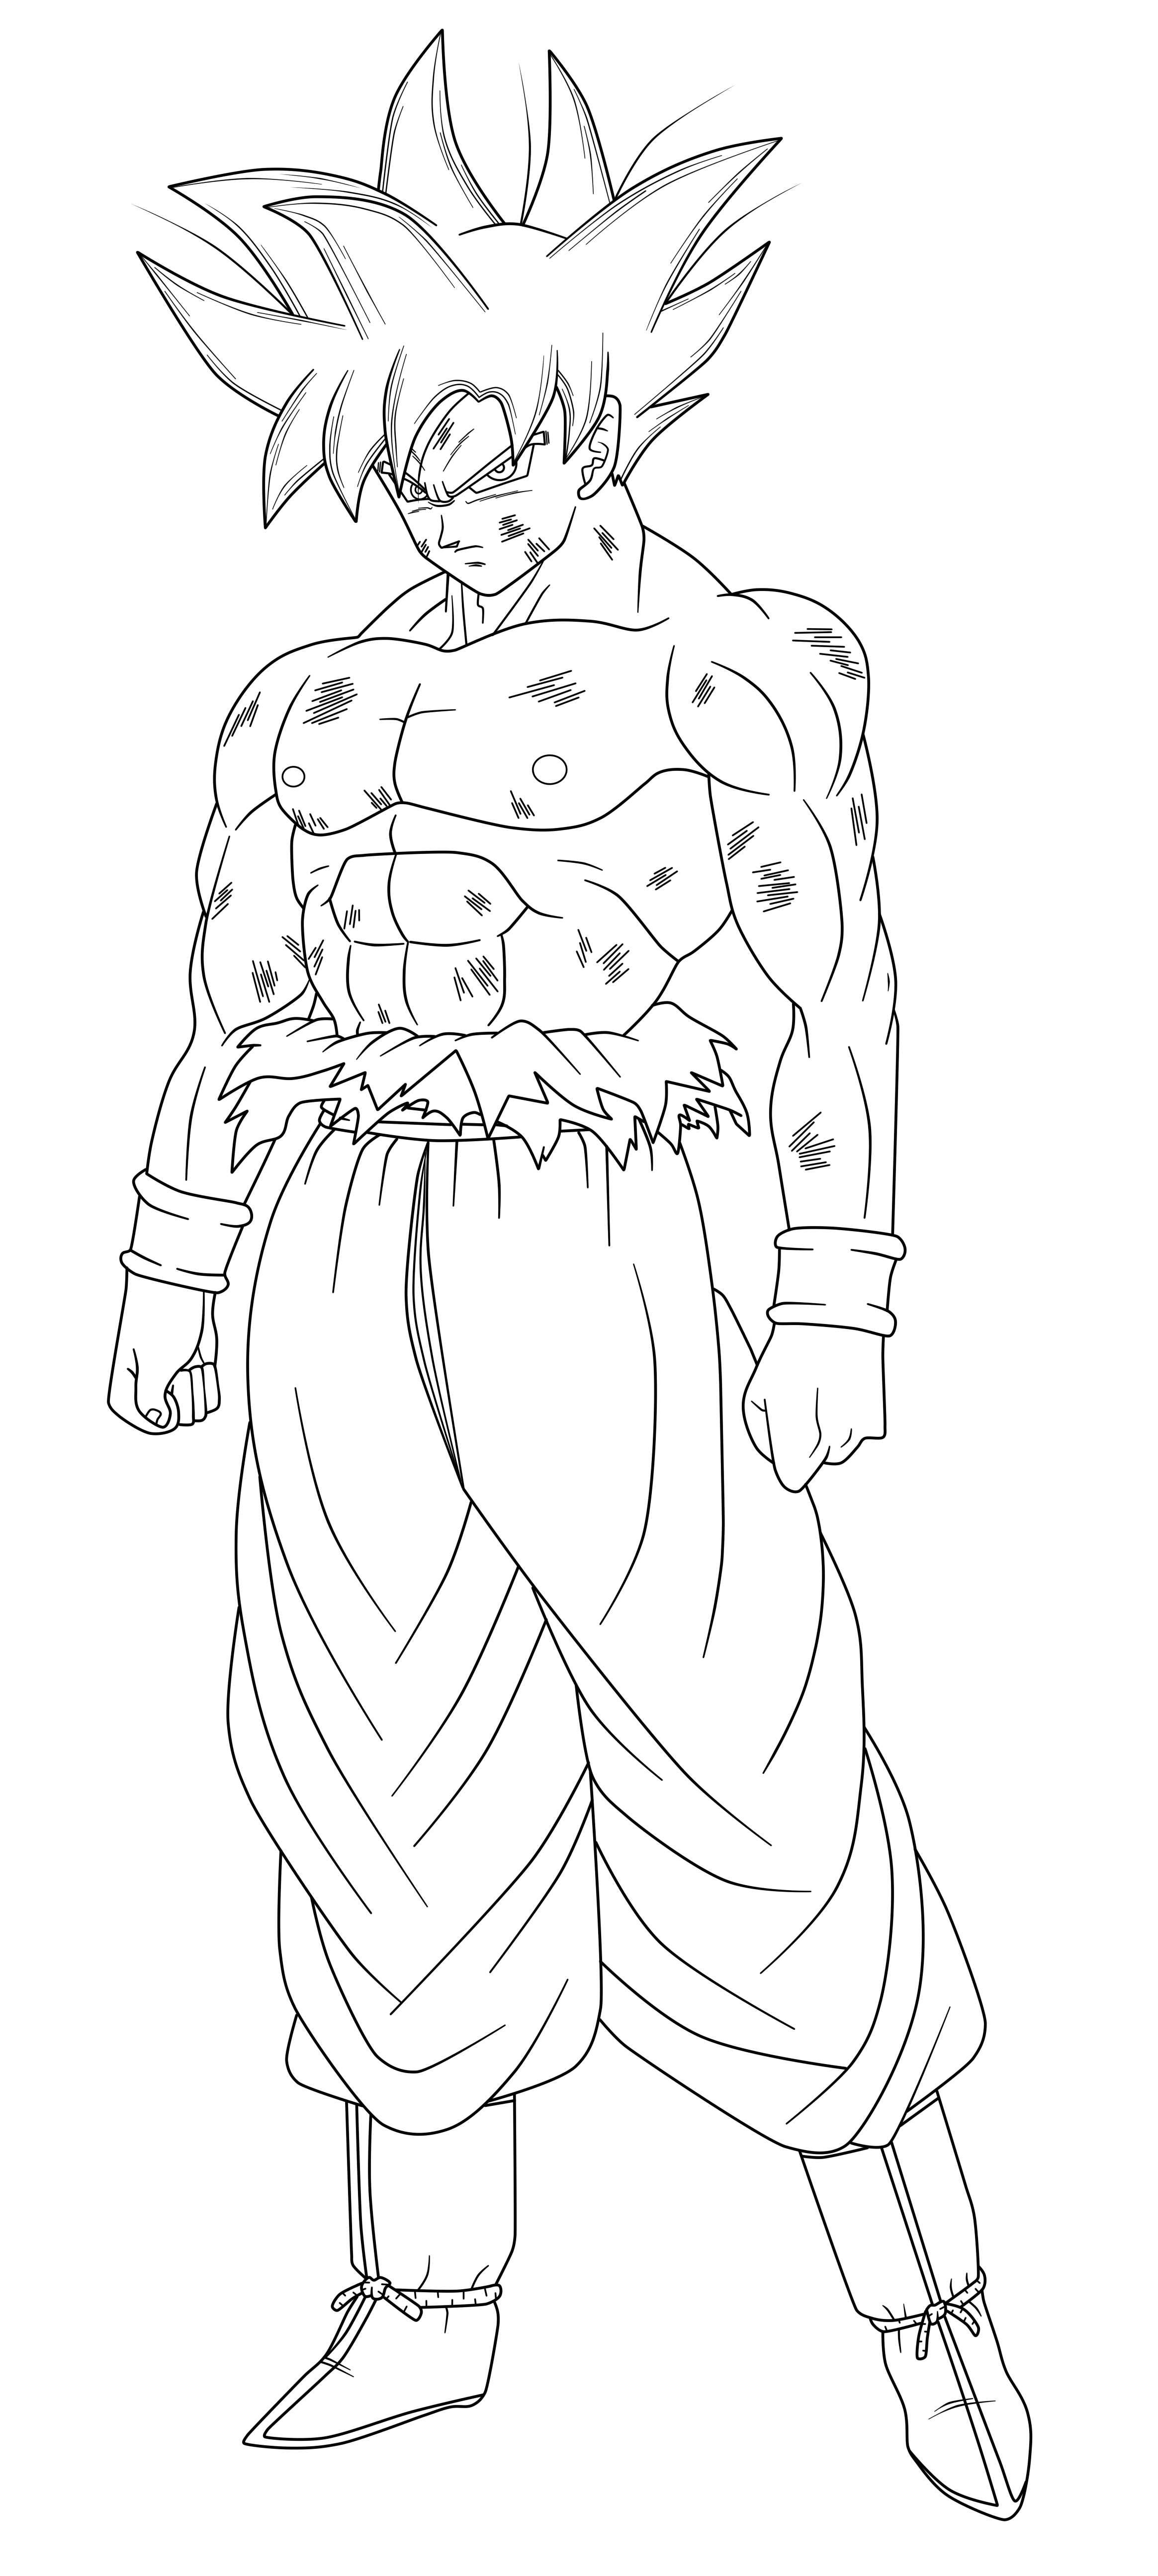 Goku Ultra Instinct Free Coloring Pages Sketch Coloring Page.